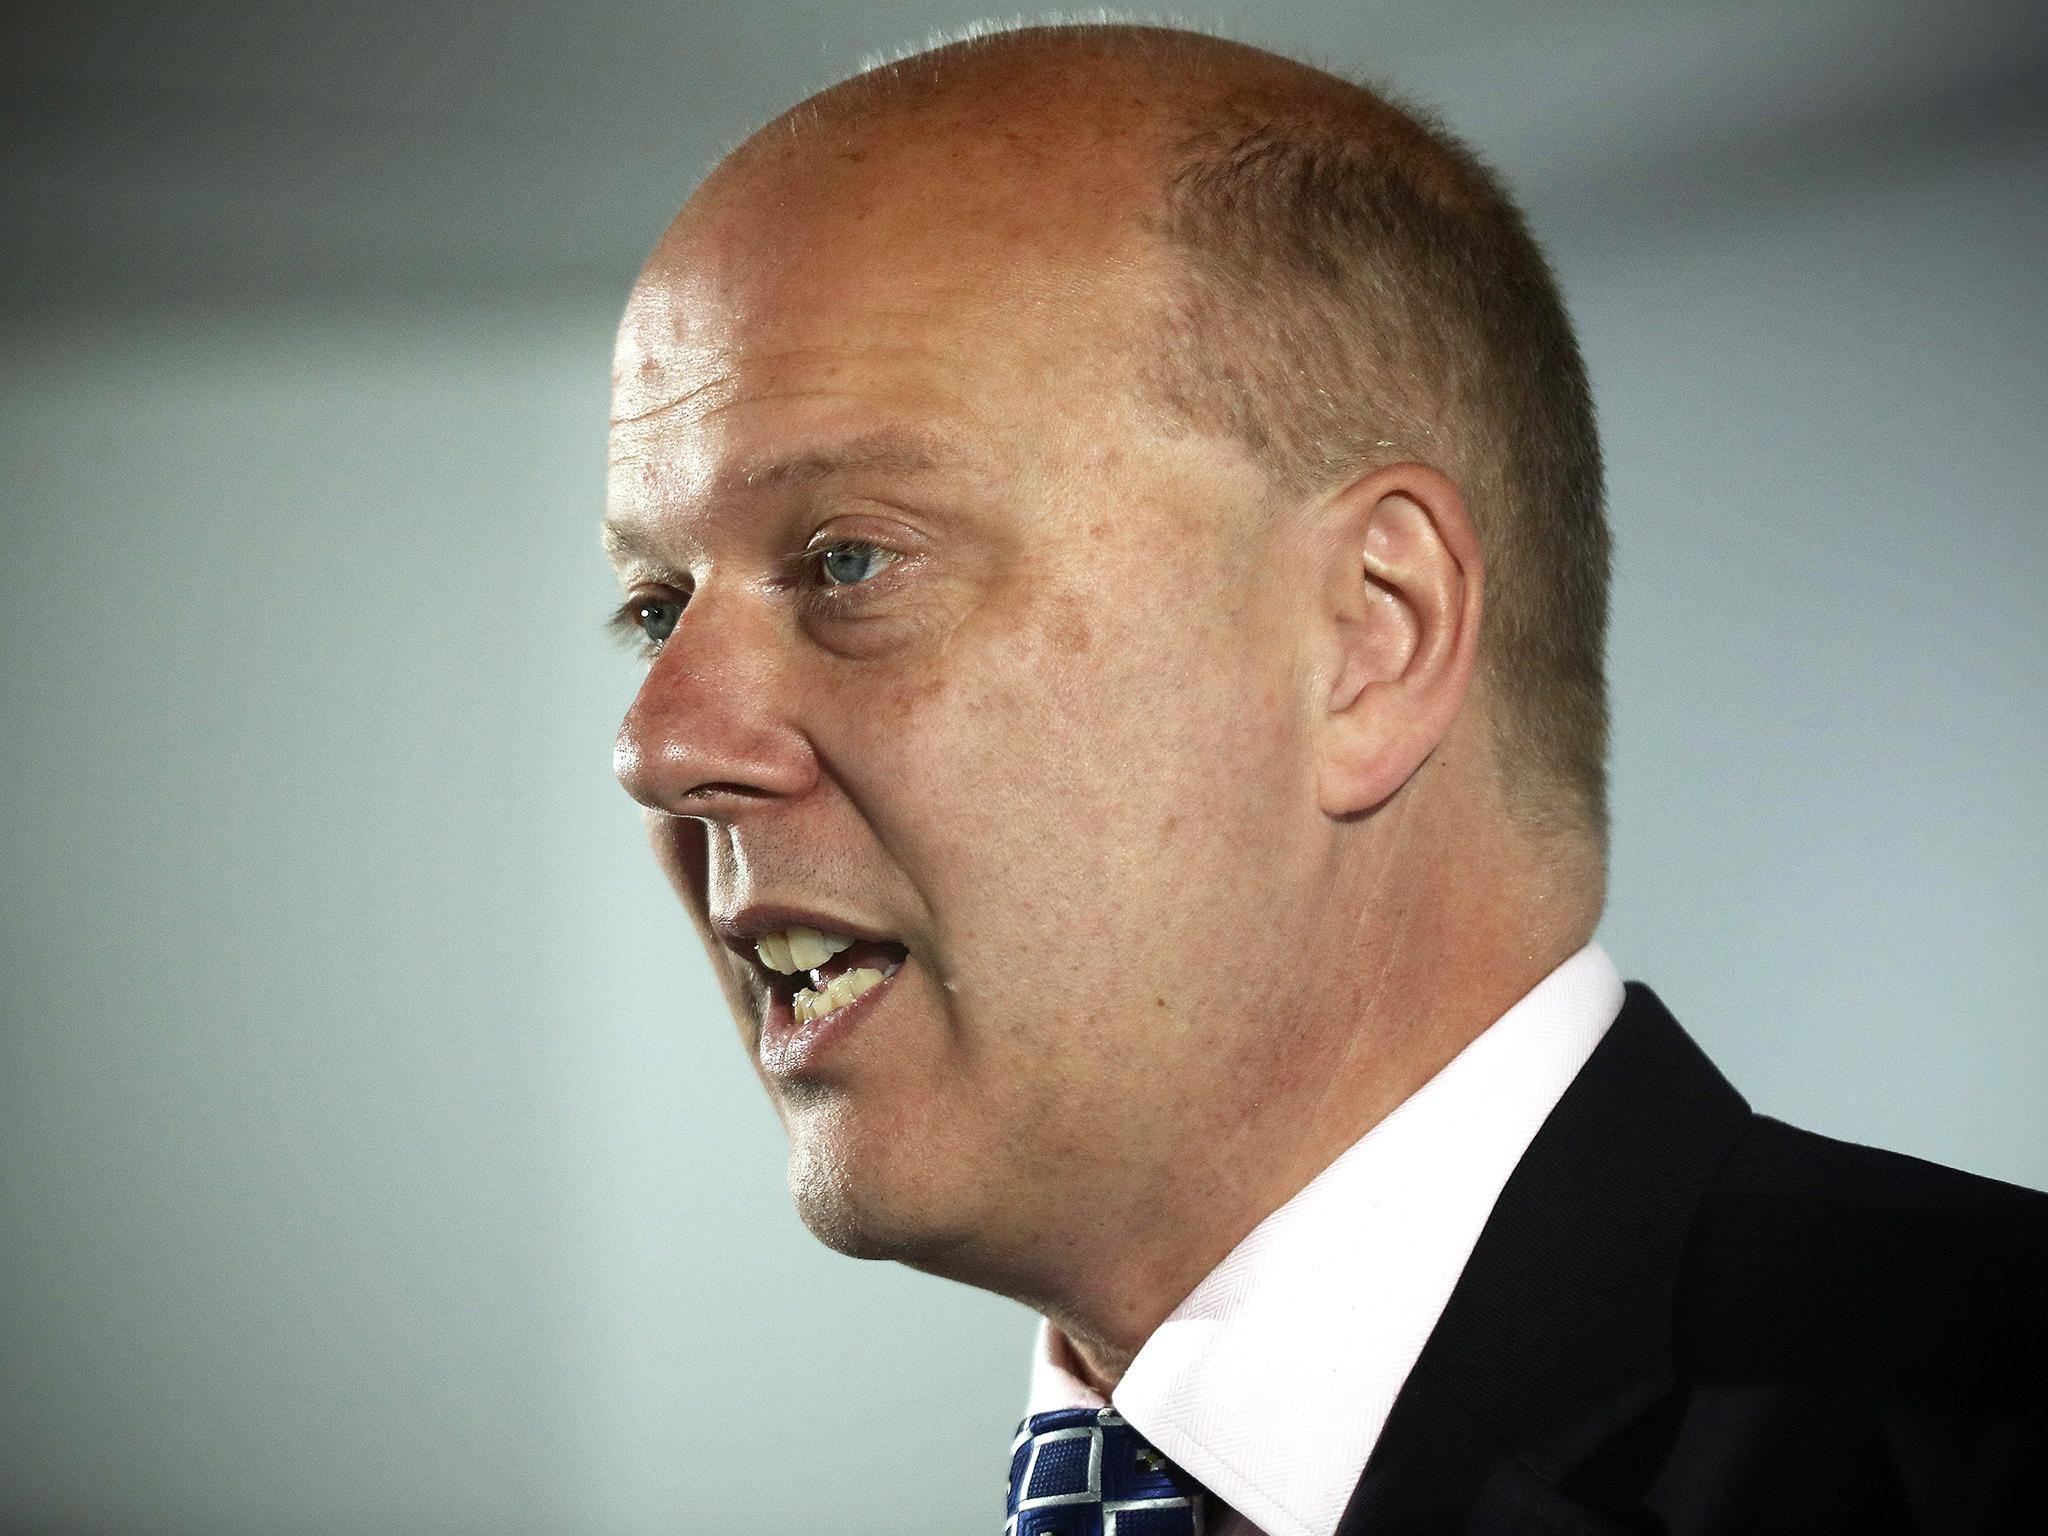 Chris Grayling urged investors not to be afraid of Brexit Britain